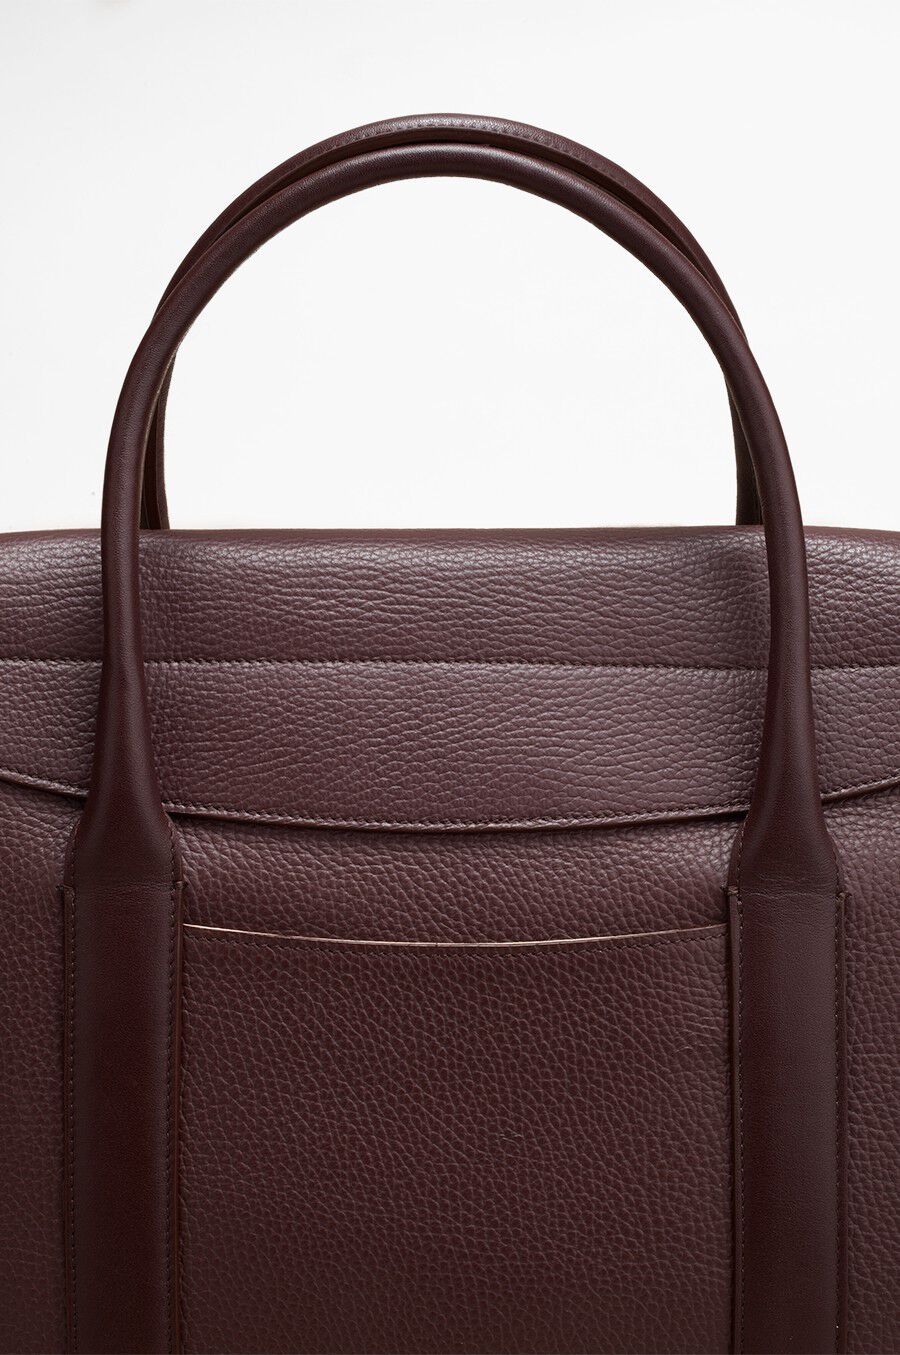 Close-up of the top of a handbag with handles.